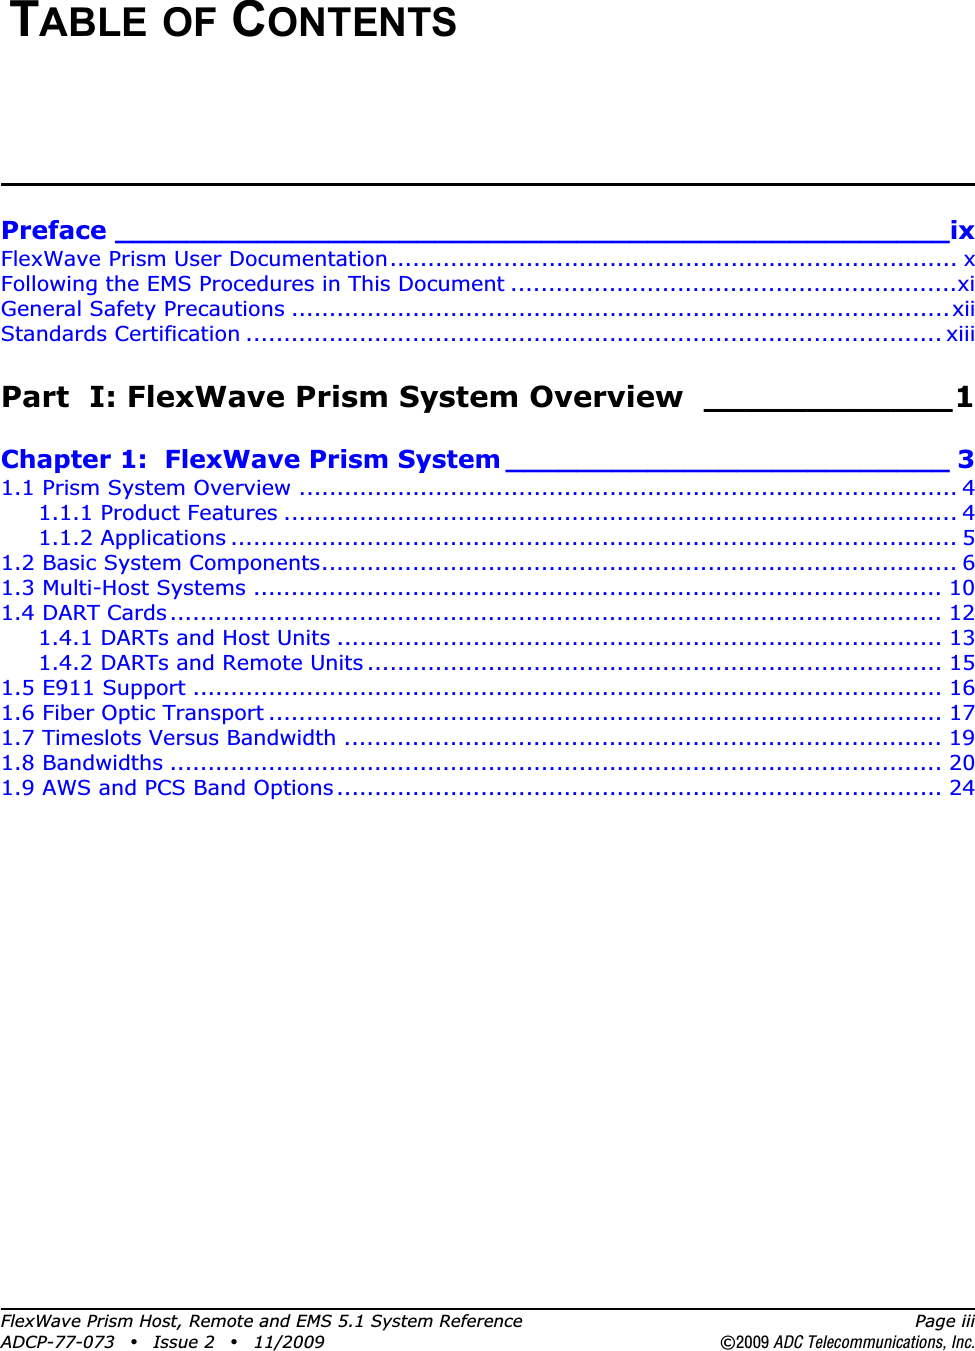 FlexWave Prism Host, Remote and EMS 5.1 System Reference Page iiiADCP-77-073 • Issue 2 • 11/2009 ©2009 ADC Telecommunications, Inc.TABLE OF CONTENTSPreface _______________________________________________ixFlexWave Prism User Documentation........................................................................... xFollowing the EMS Procedures in This Document ...........................................................xiGeneral Safety Precautions .......................................................................................xiiStandards Certification ............................................................................................ xiiiPart  I: FlexWave Prism System Overview  ____________1Chapter 1:  FlexWave Prism System _________________________ 31.1 Prism System Overview ....................................................................................... 41.1.1 Product Features ......................................................................................... 41.1.2 Applications ................................................................................................ 51.2 Basic System Components.................................................................................... 61.3 Multi-Host Systems ........................................................................................... 101.4 DART Cards...................................................................................................... 121.4.1 DARTs and Host Units ................................................................................ 131.4.2 DARTs and Remote Units ............................................................................ 151.5 E911 Support ................................................................................................... 161.6 Fiber Optic Transport ......................................................................................... 171.7 Timeslots Versus Bandwidth ............................................................................... 191.8 Bandwidths ...................................................................................................... 201.9 AWS and PCS Band Options................................................................................ 24